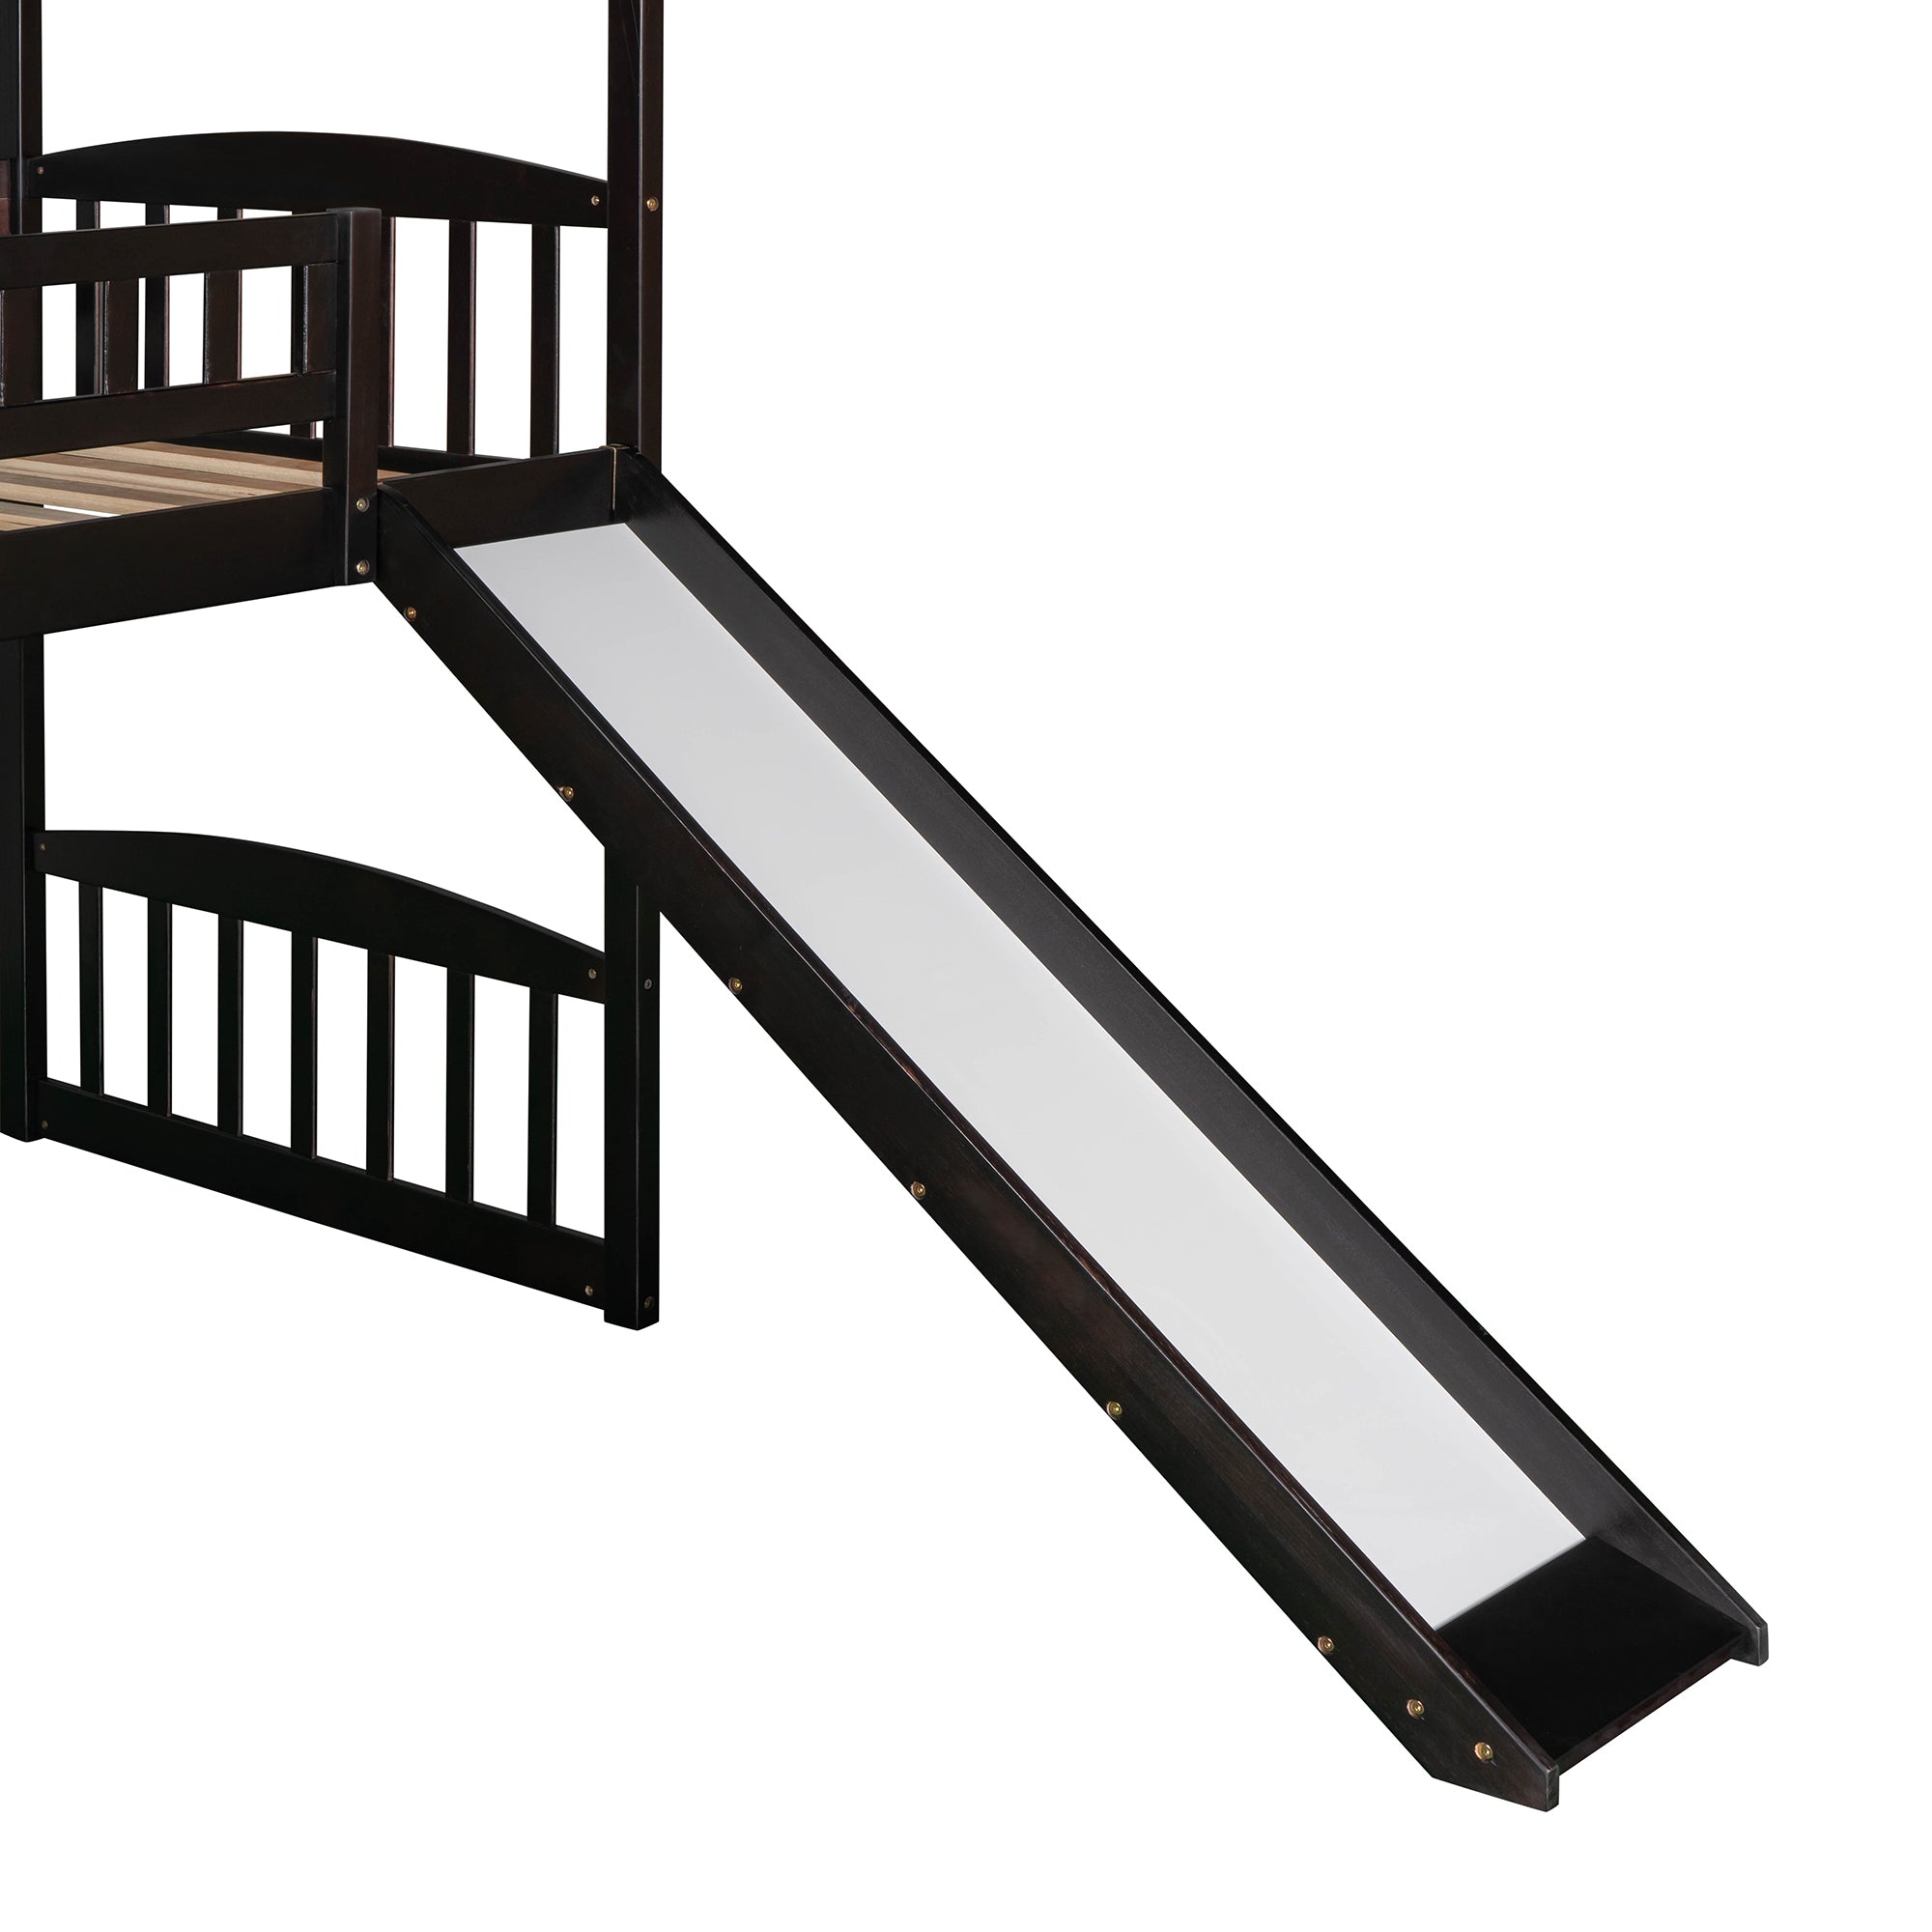 Twin Loft Bed with Slide (Espresso)